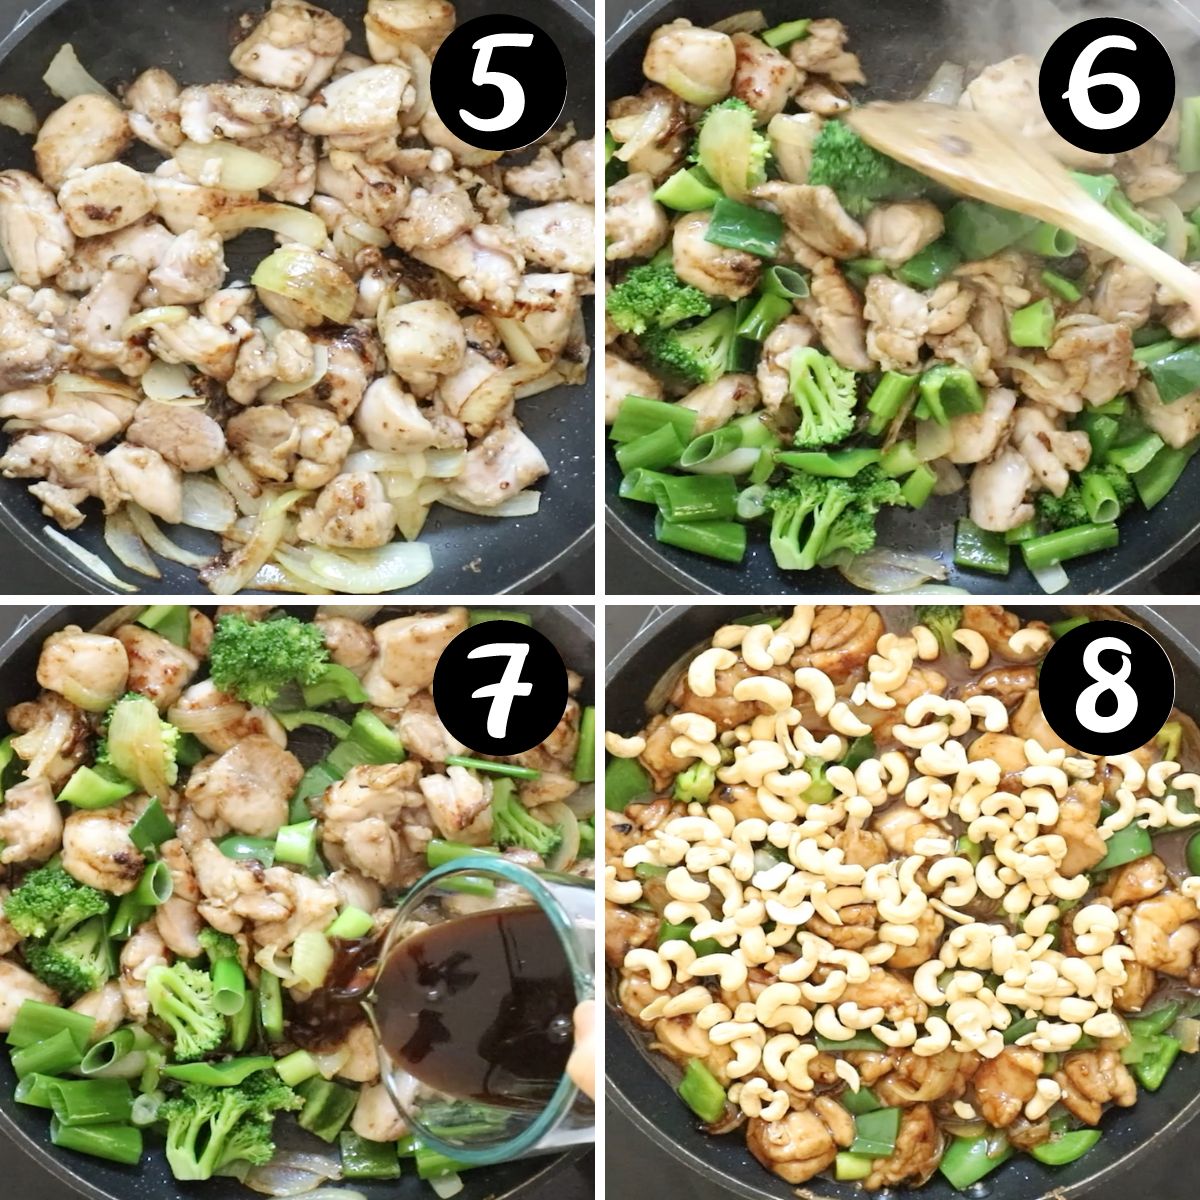 chicken stir fry being assembled in a frying pan.